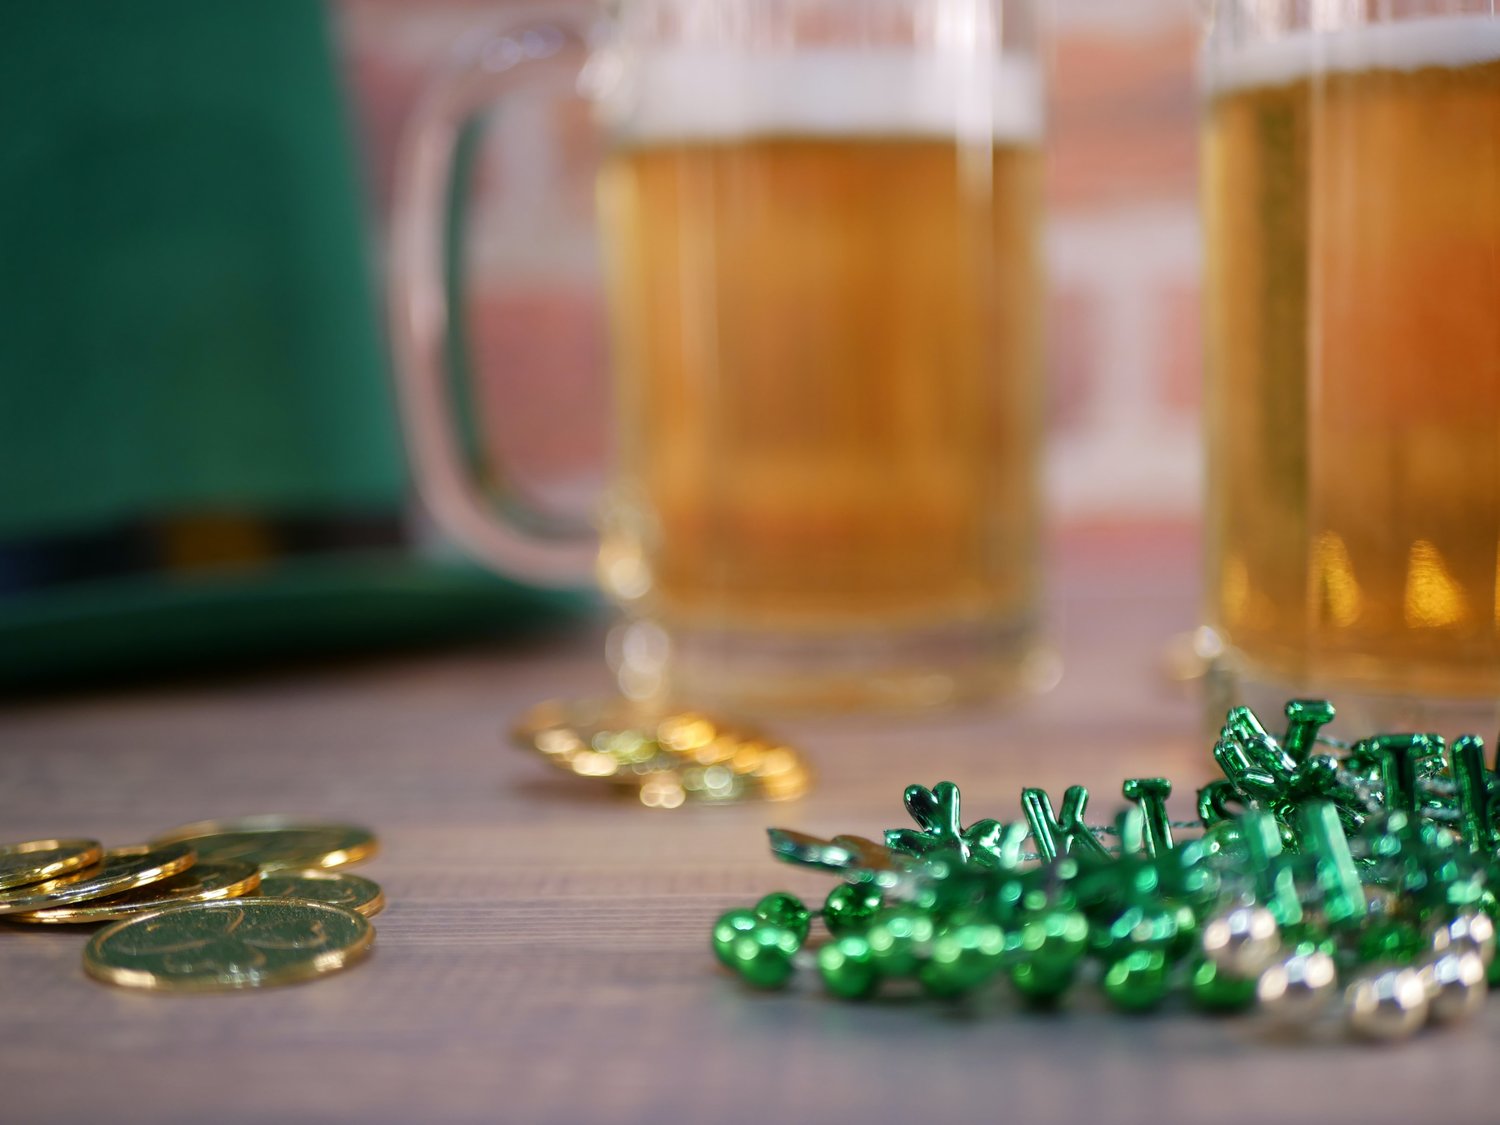 Downtown Fayetteville will celebrate St. Patrick's Day with a bar crawl on Friday evening.